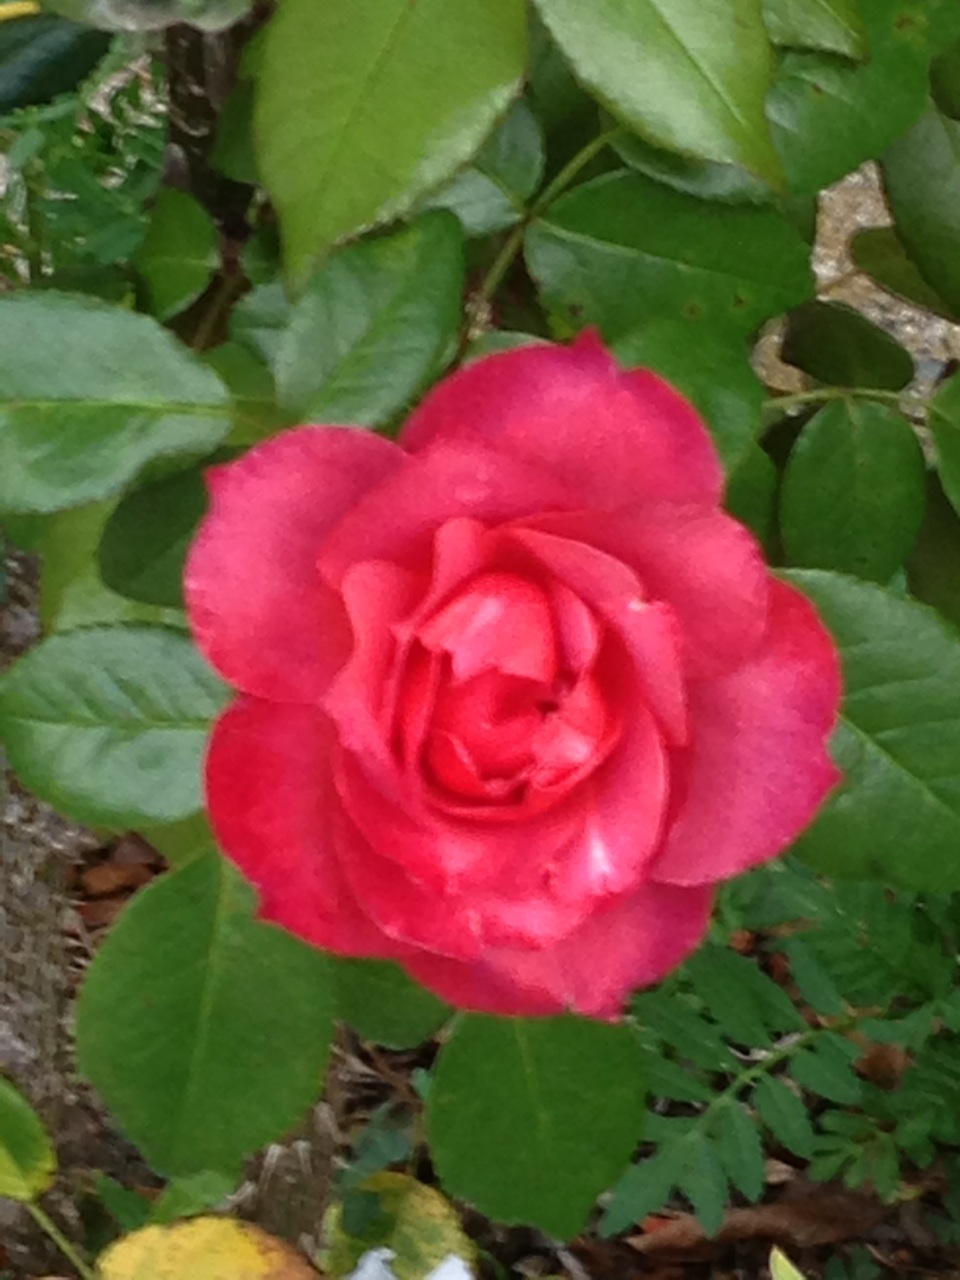 a large pink rose growing next to some green leaves